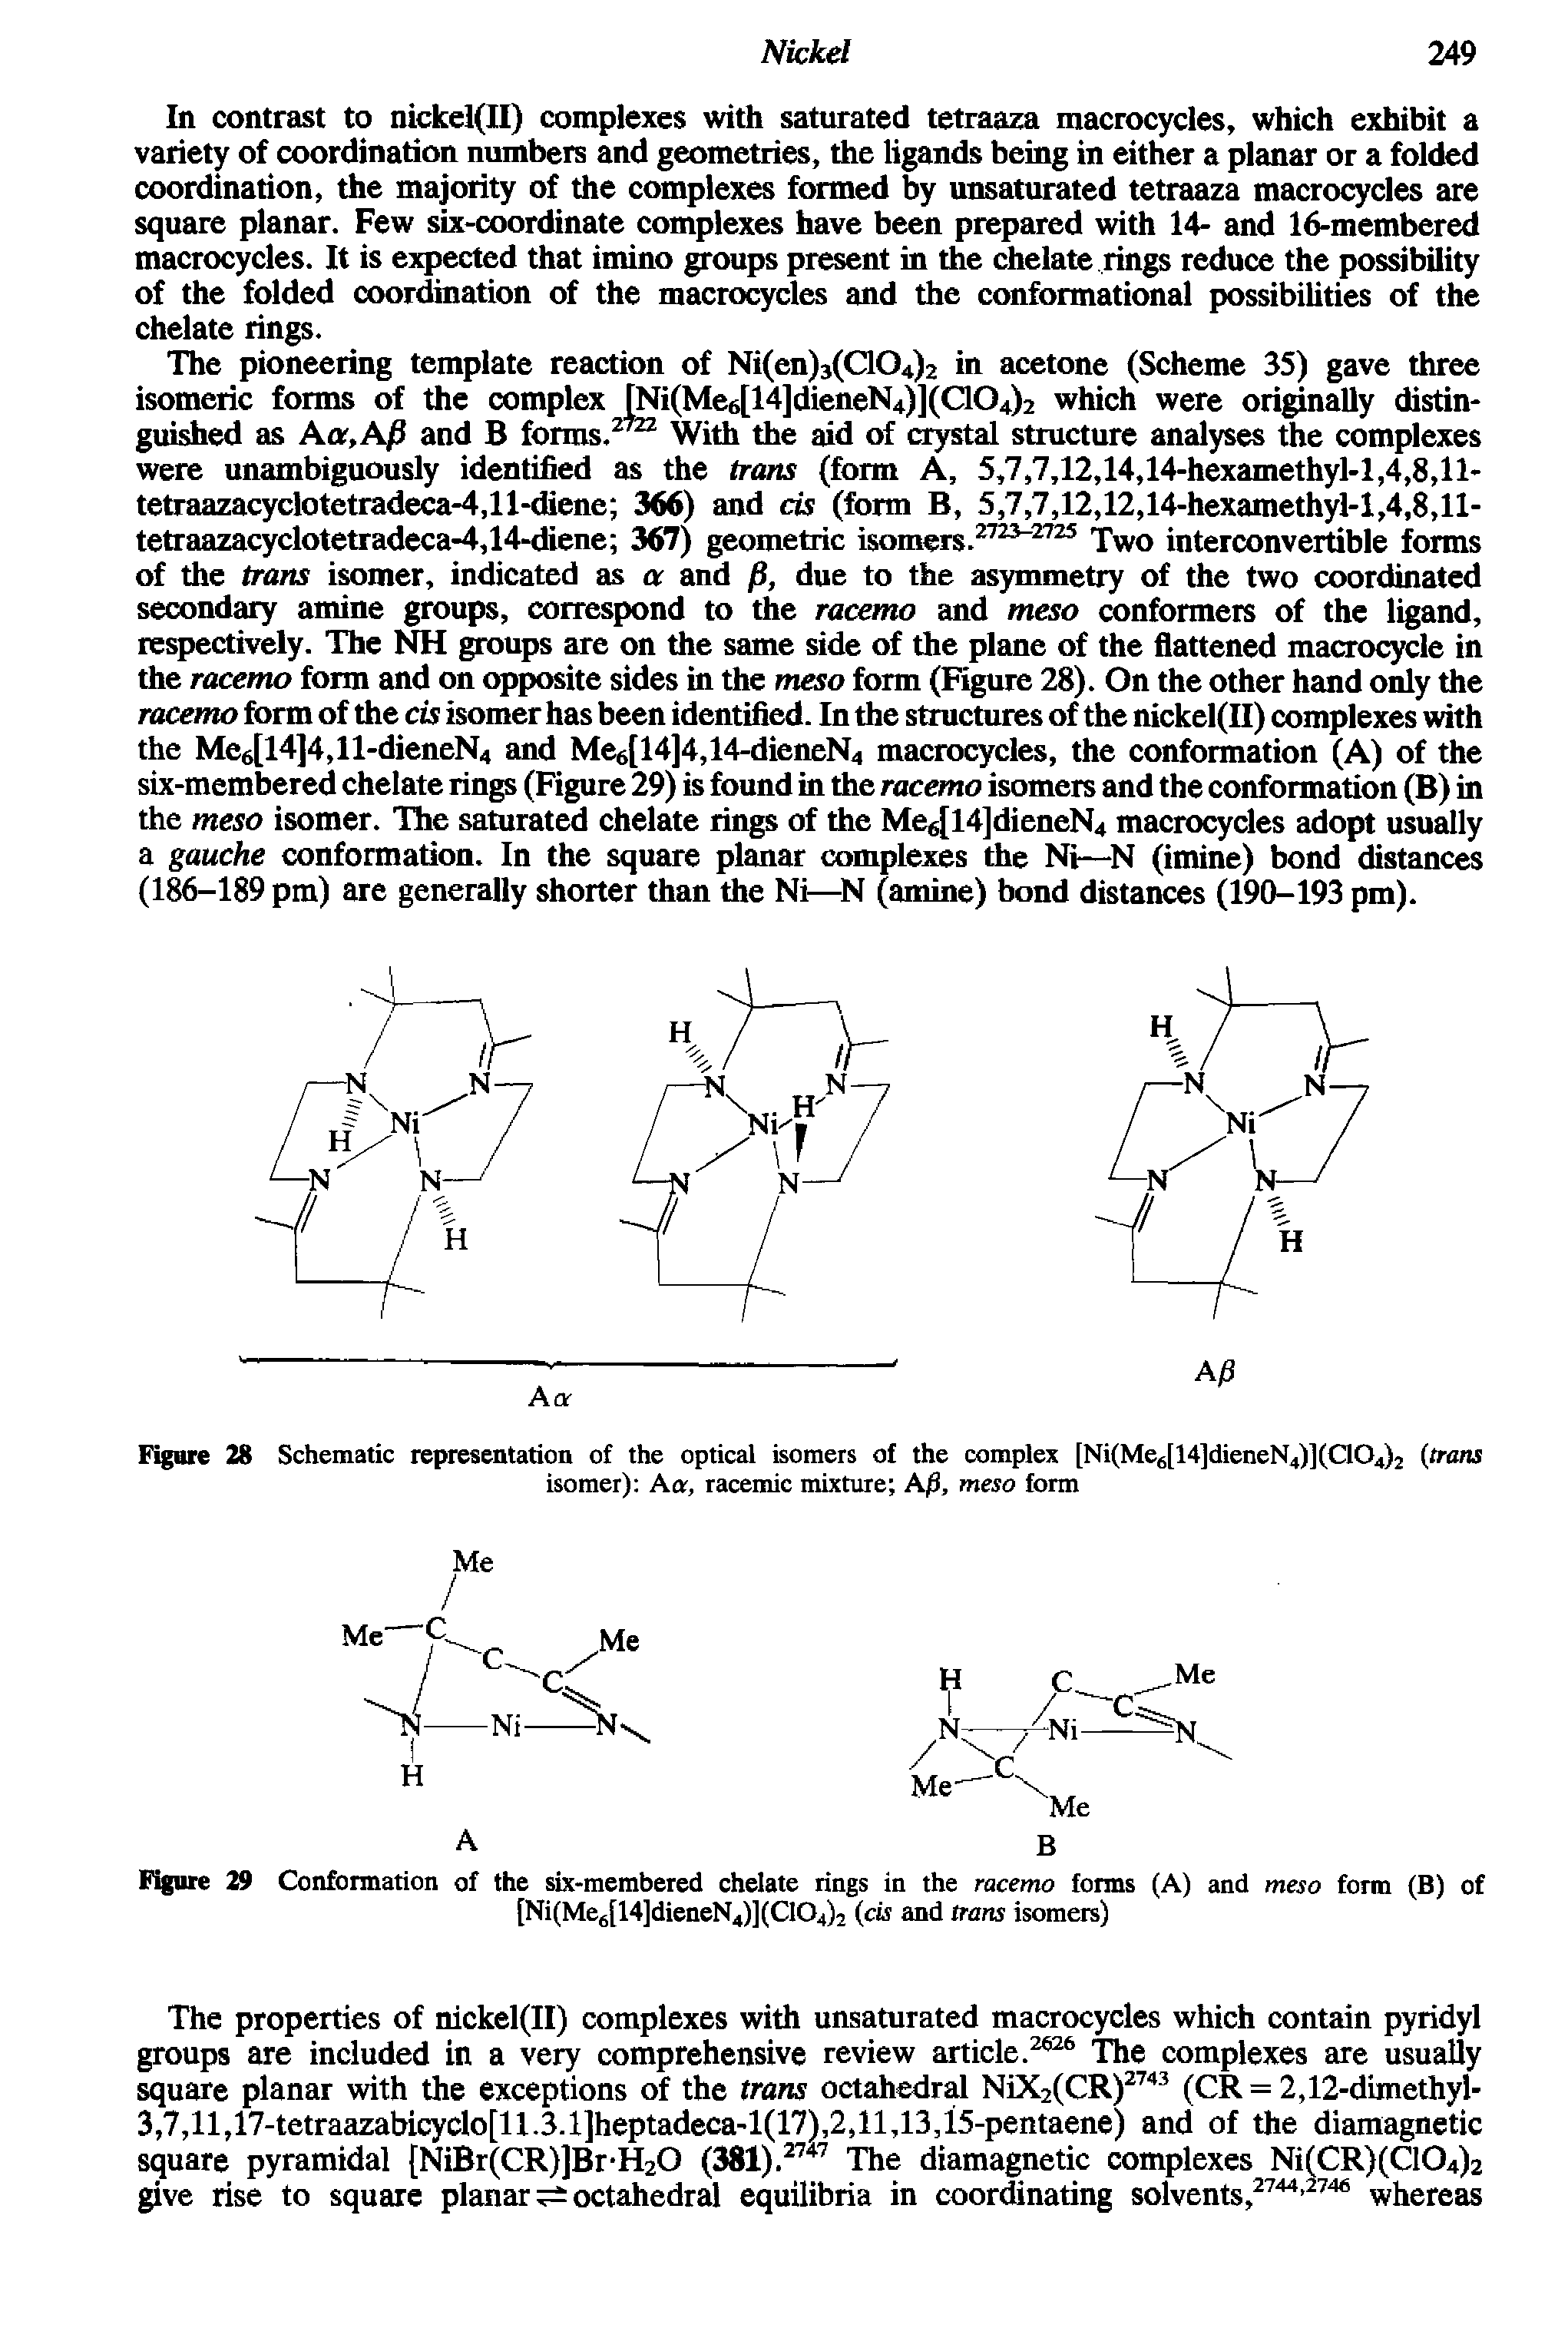 Figure 29 Conformation of the six-membered chelate rings in the racemo forms (A) and meso form (B) of...